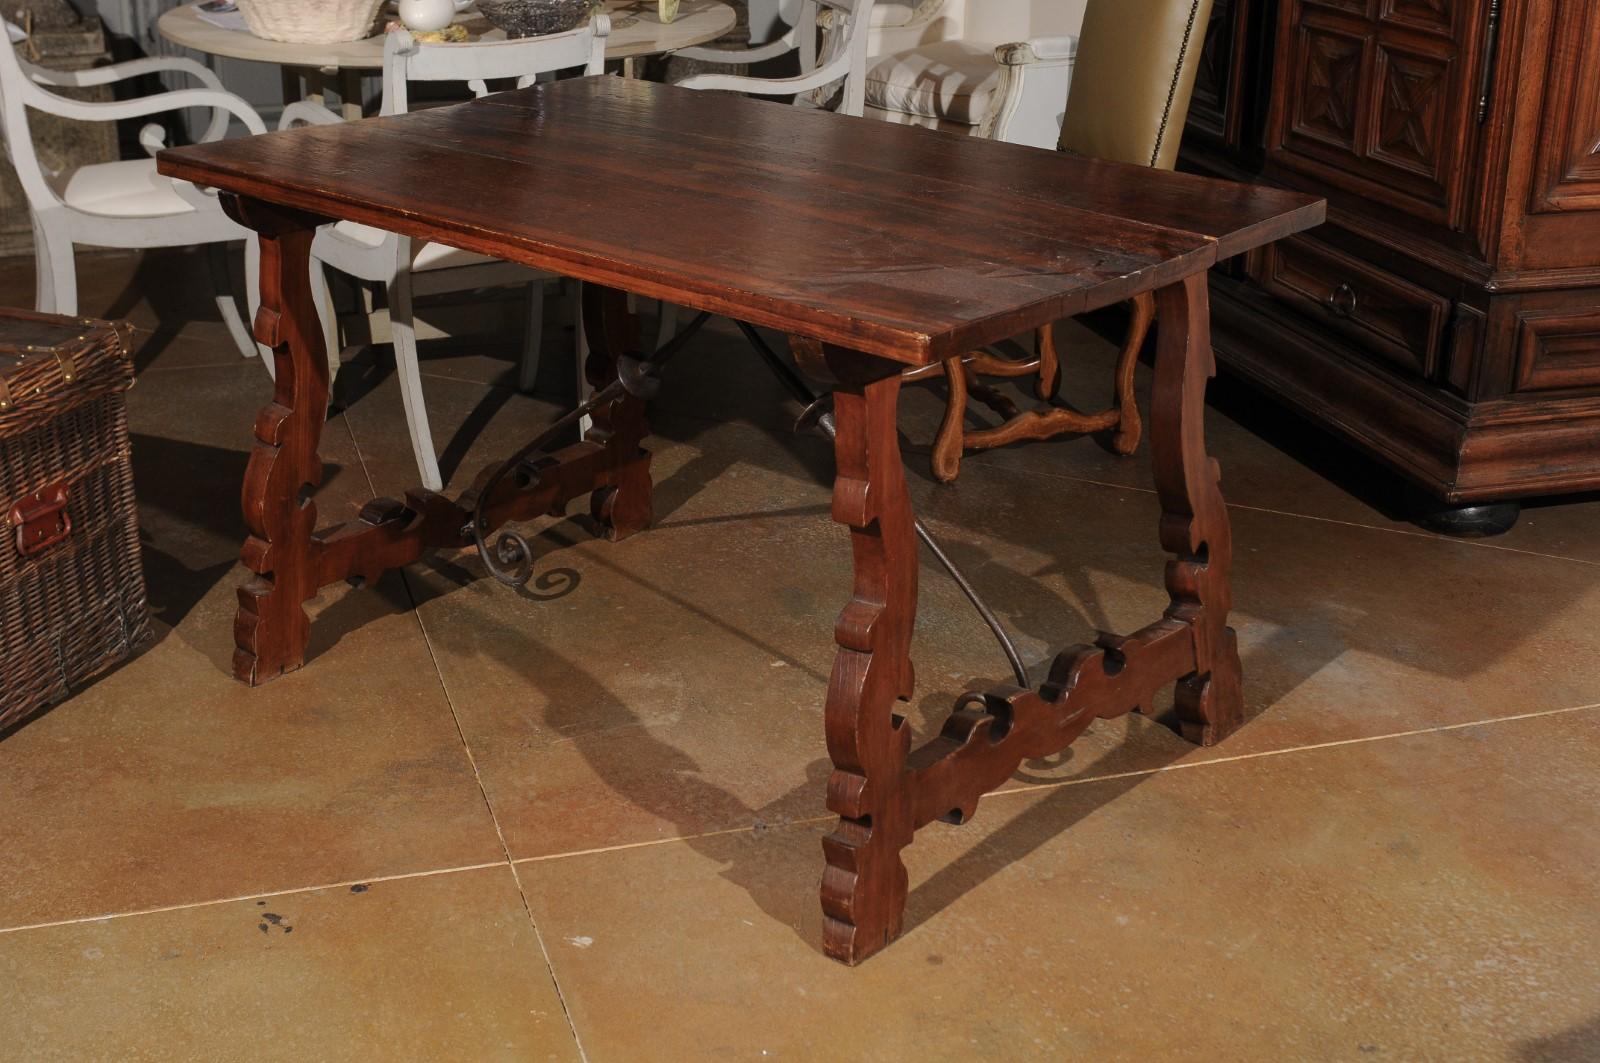 An Italian Baroque style carved walnut Fratino table from the 19th century with iron stretchers. Born in Italy during the 19th century, this exquisite walnut table features a rectangular planked top, sitting above an eye-catching Baroque style